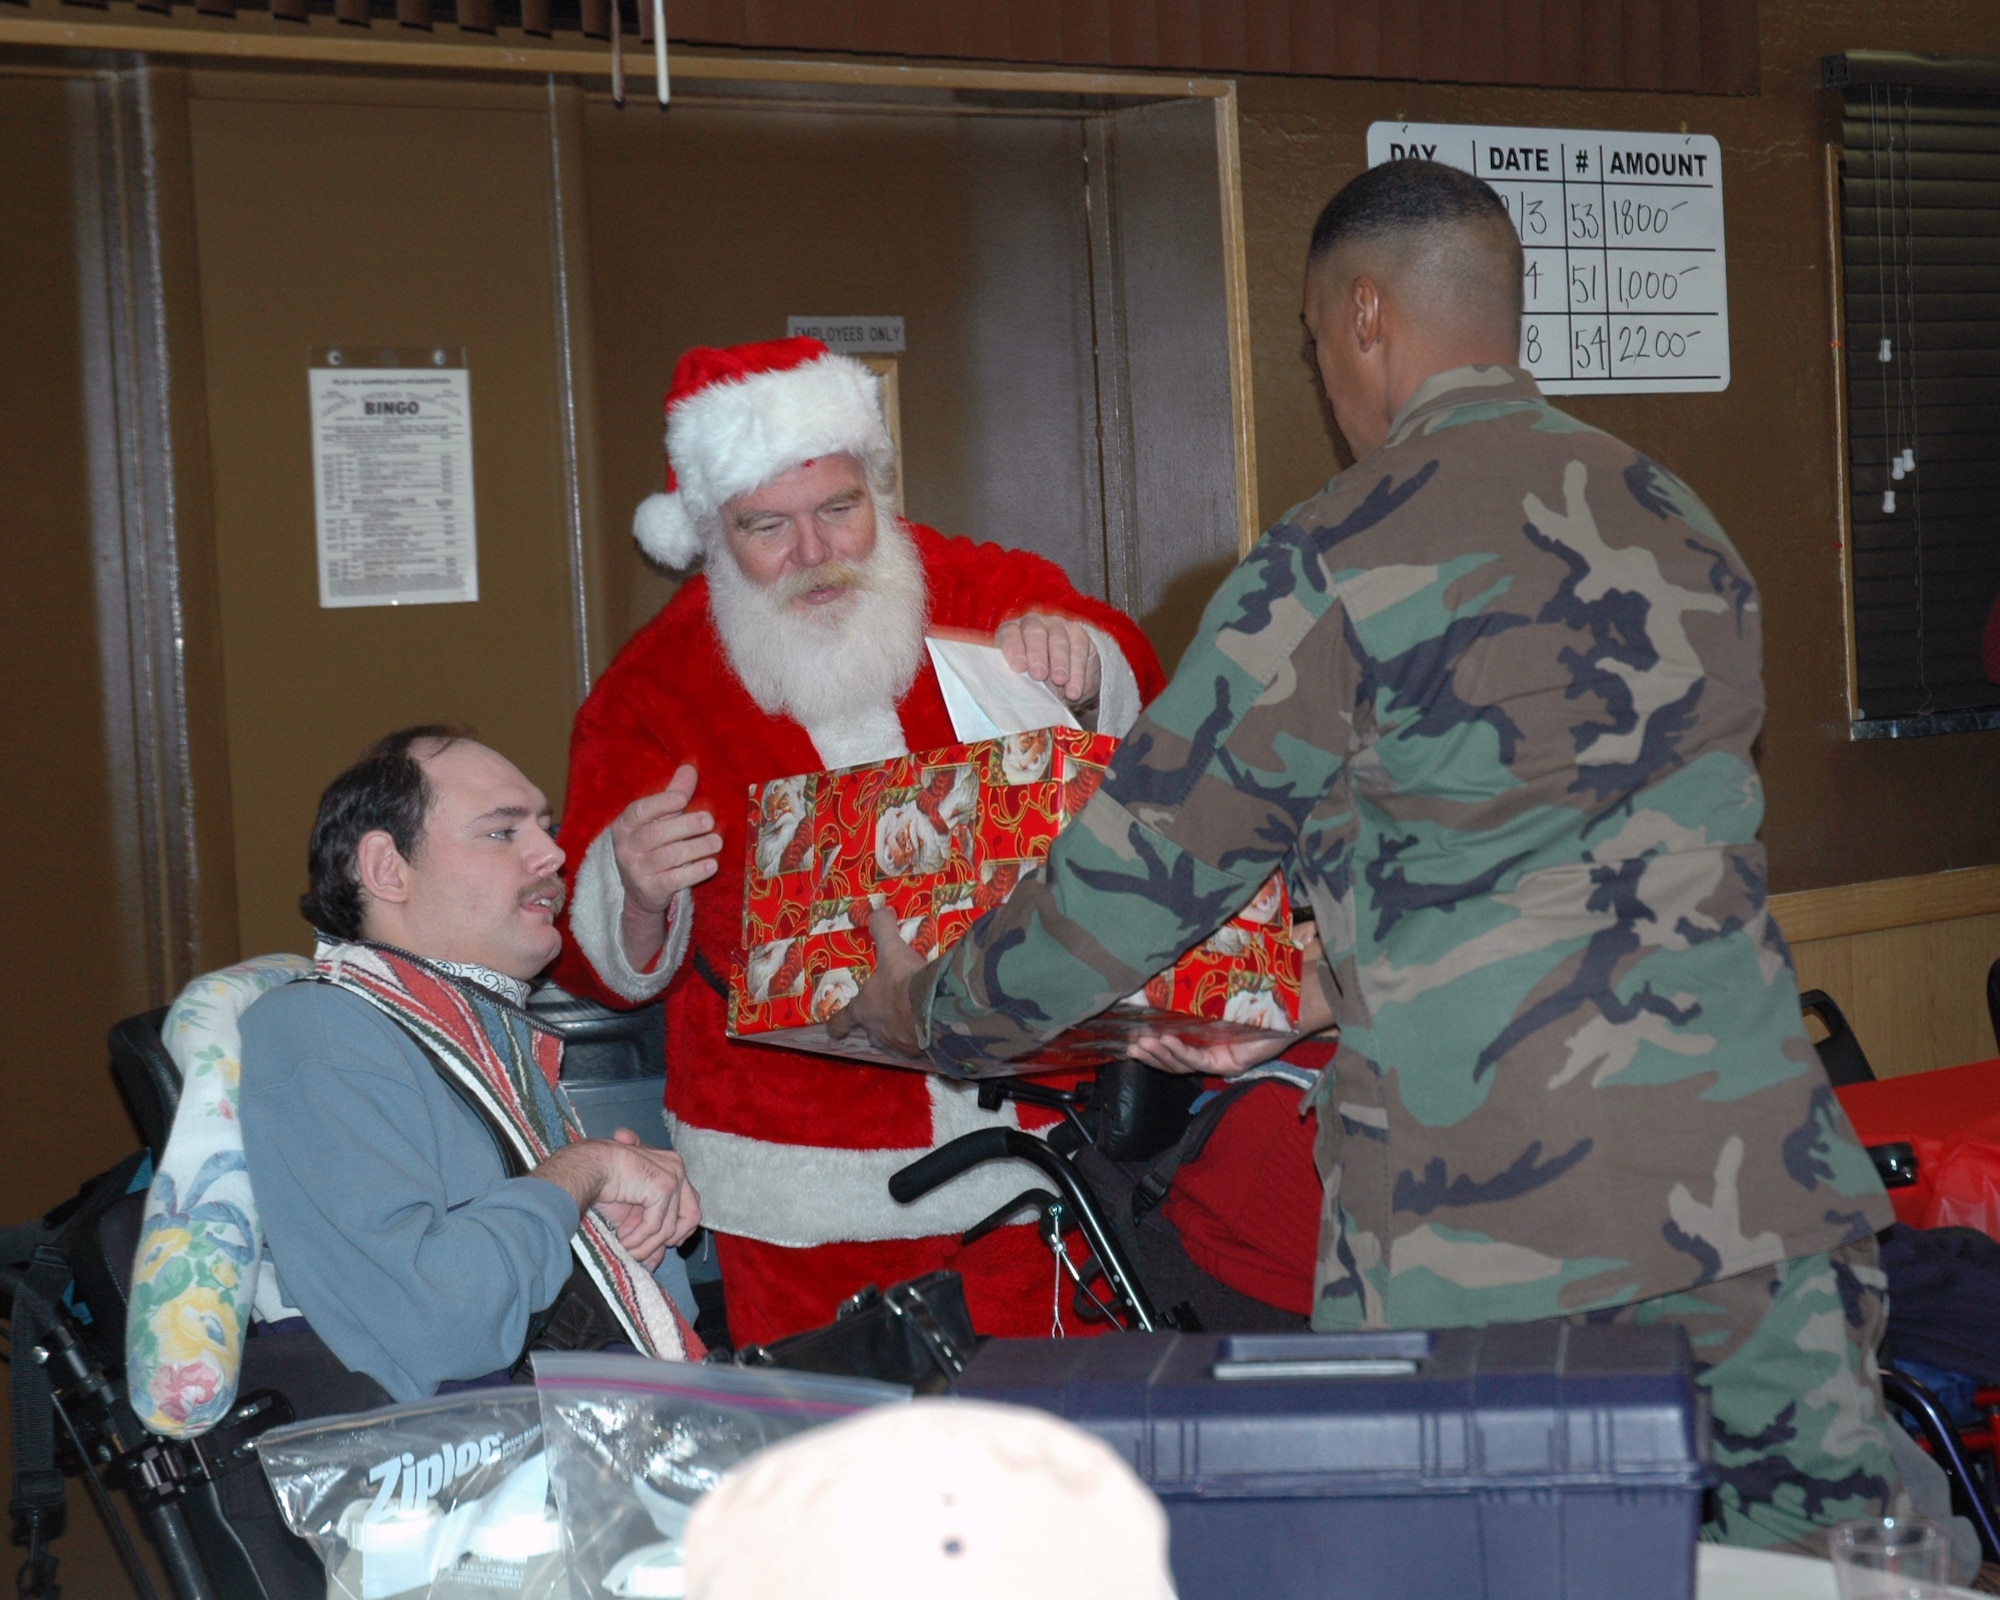 Second Lt. Derrick Young, 944th Fighter Wing military equal opportunity, hands a present to Santa during the wing's annual holiday kick off celebration at the American Italian Club in Phoenix on Dec. 2. Thirteen members of the wing visited with about 200 clients of the Valley of the Sun Habilitation School, an event the wing has participated in for more than 20 years. (U.S. Air Force photo/Tech. Sgt. Barbara Plante)